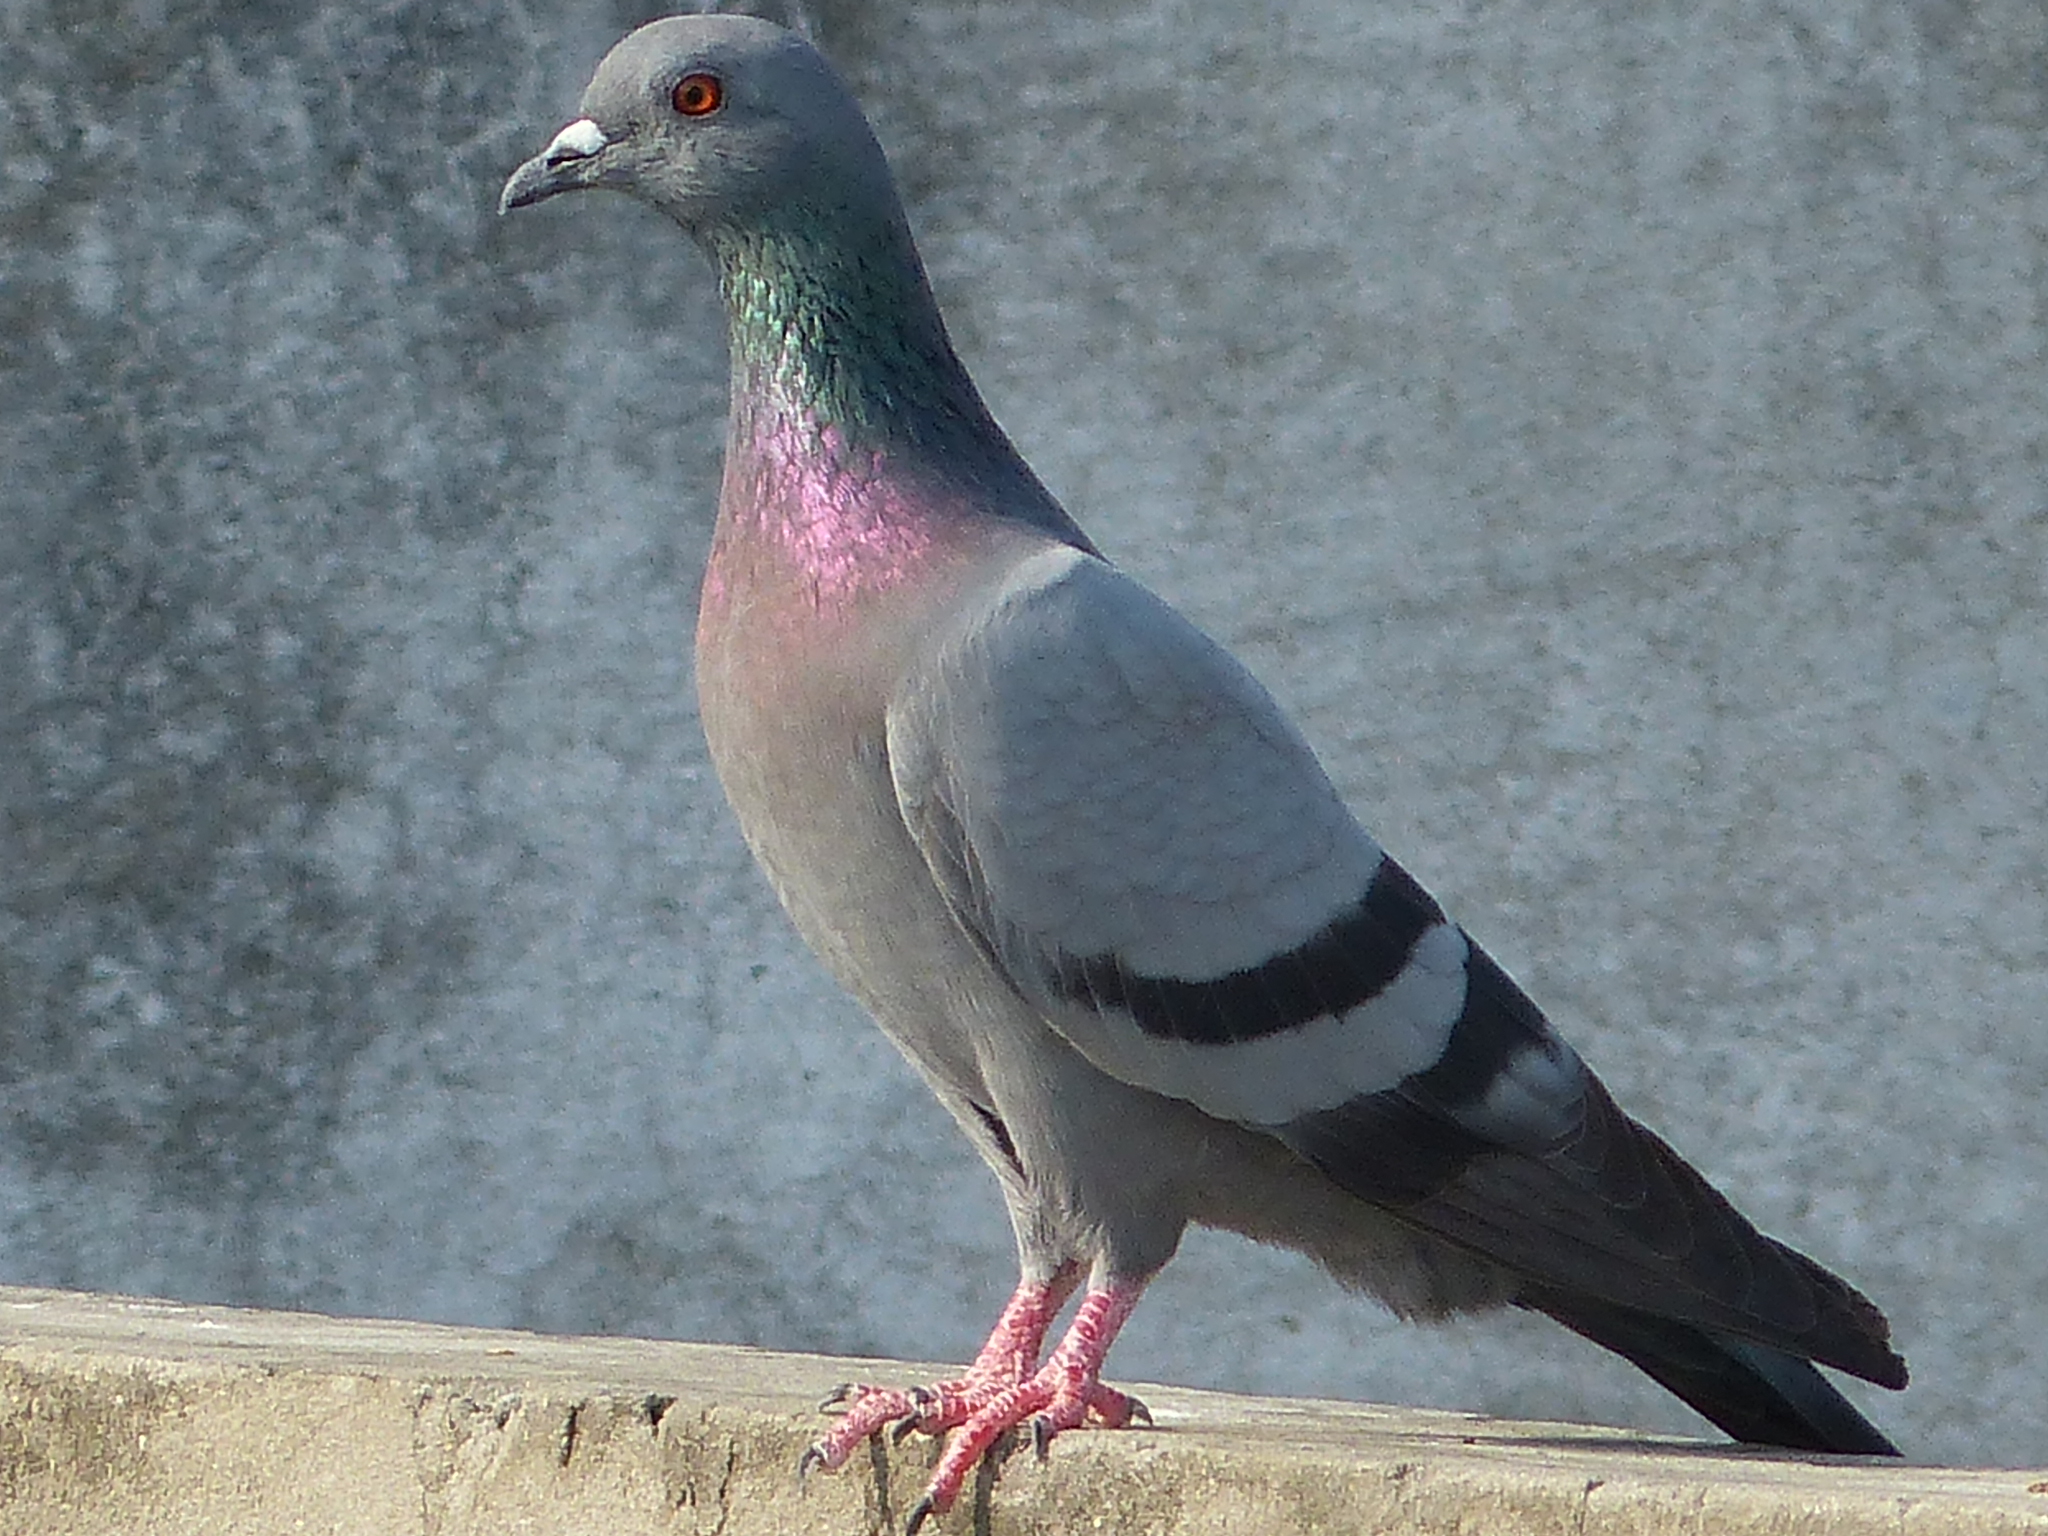 a pigeon is standing alone on the ledge